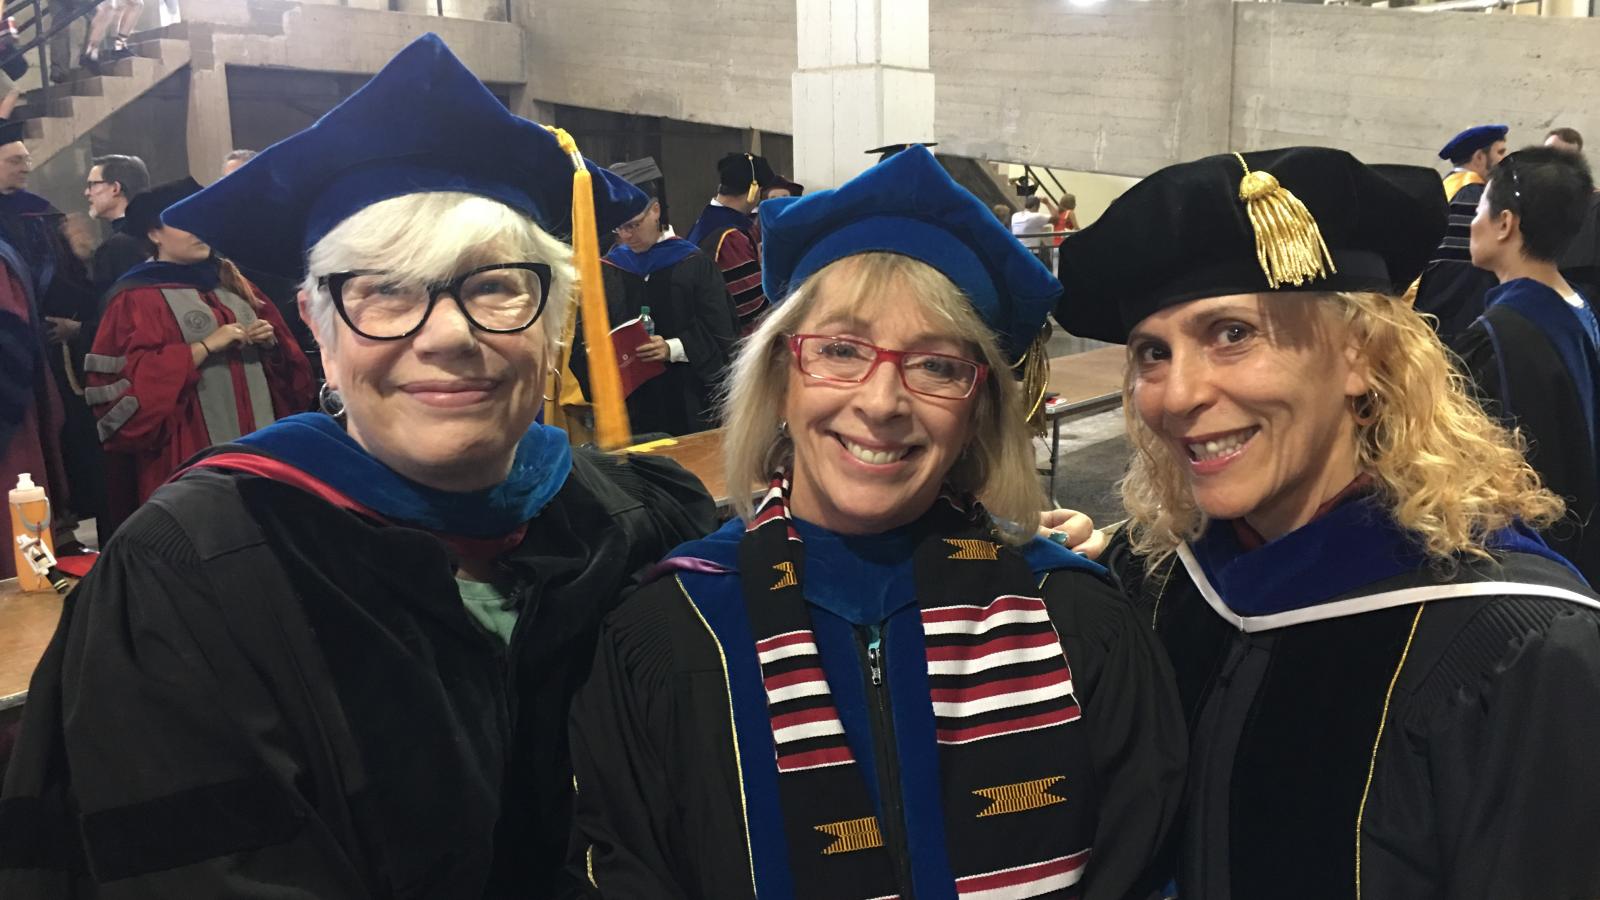 Dr.'s Smith-Shank, Ballengee Morris, and Goldberg-Miller (left to right) prepare to hood soon to be PhD alumni